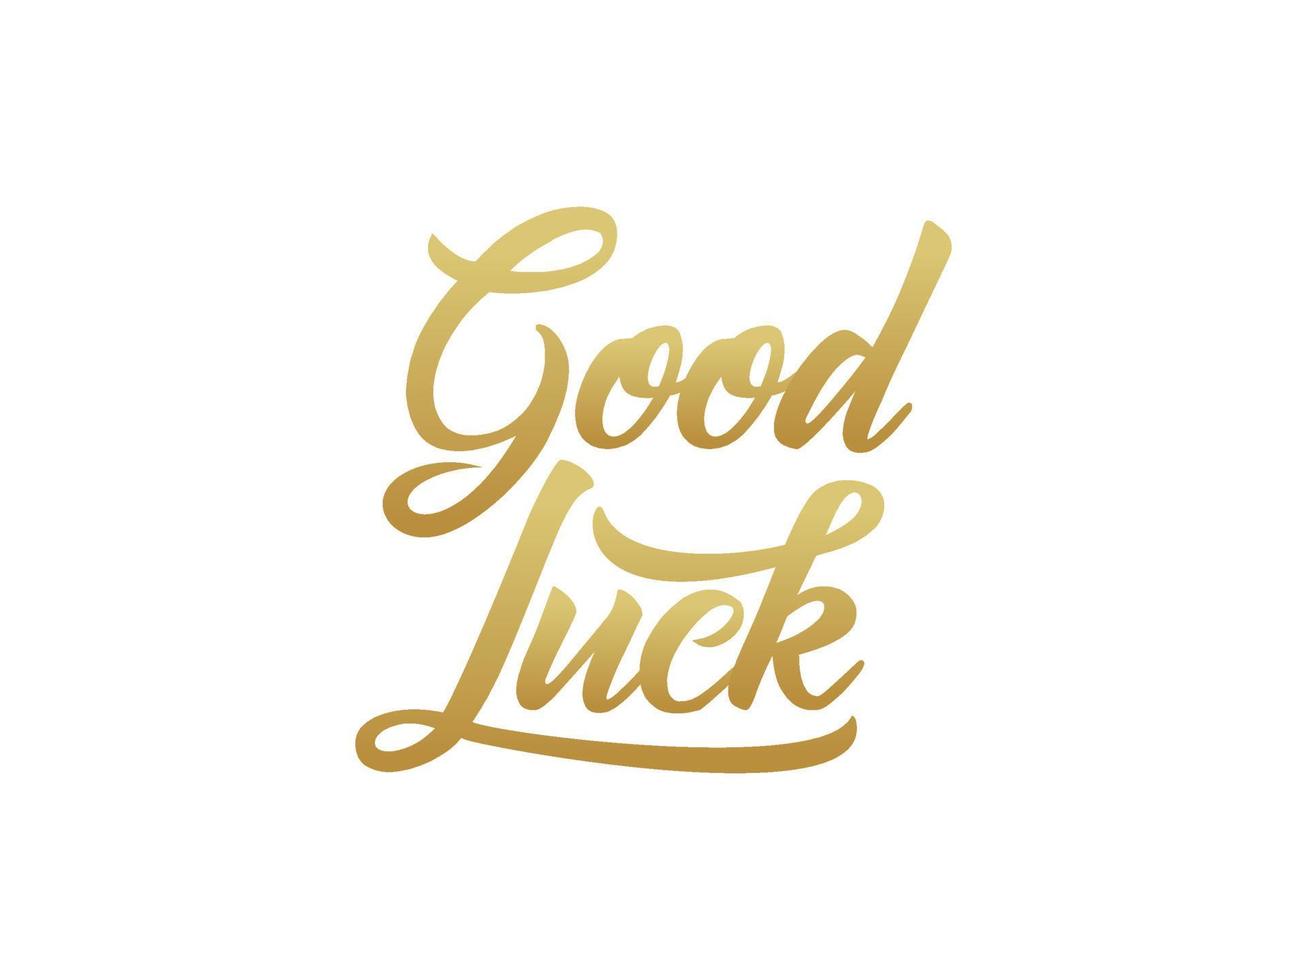 Good Luck text Handwritten Lettering Calligraphy with Gold Style isolated on White Background. Greeting Card Vector Illustration.